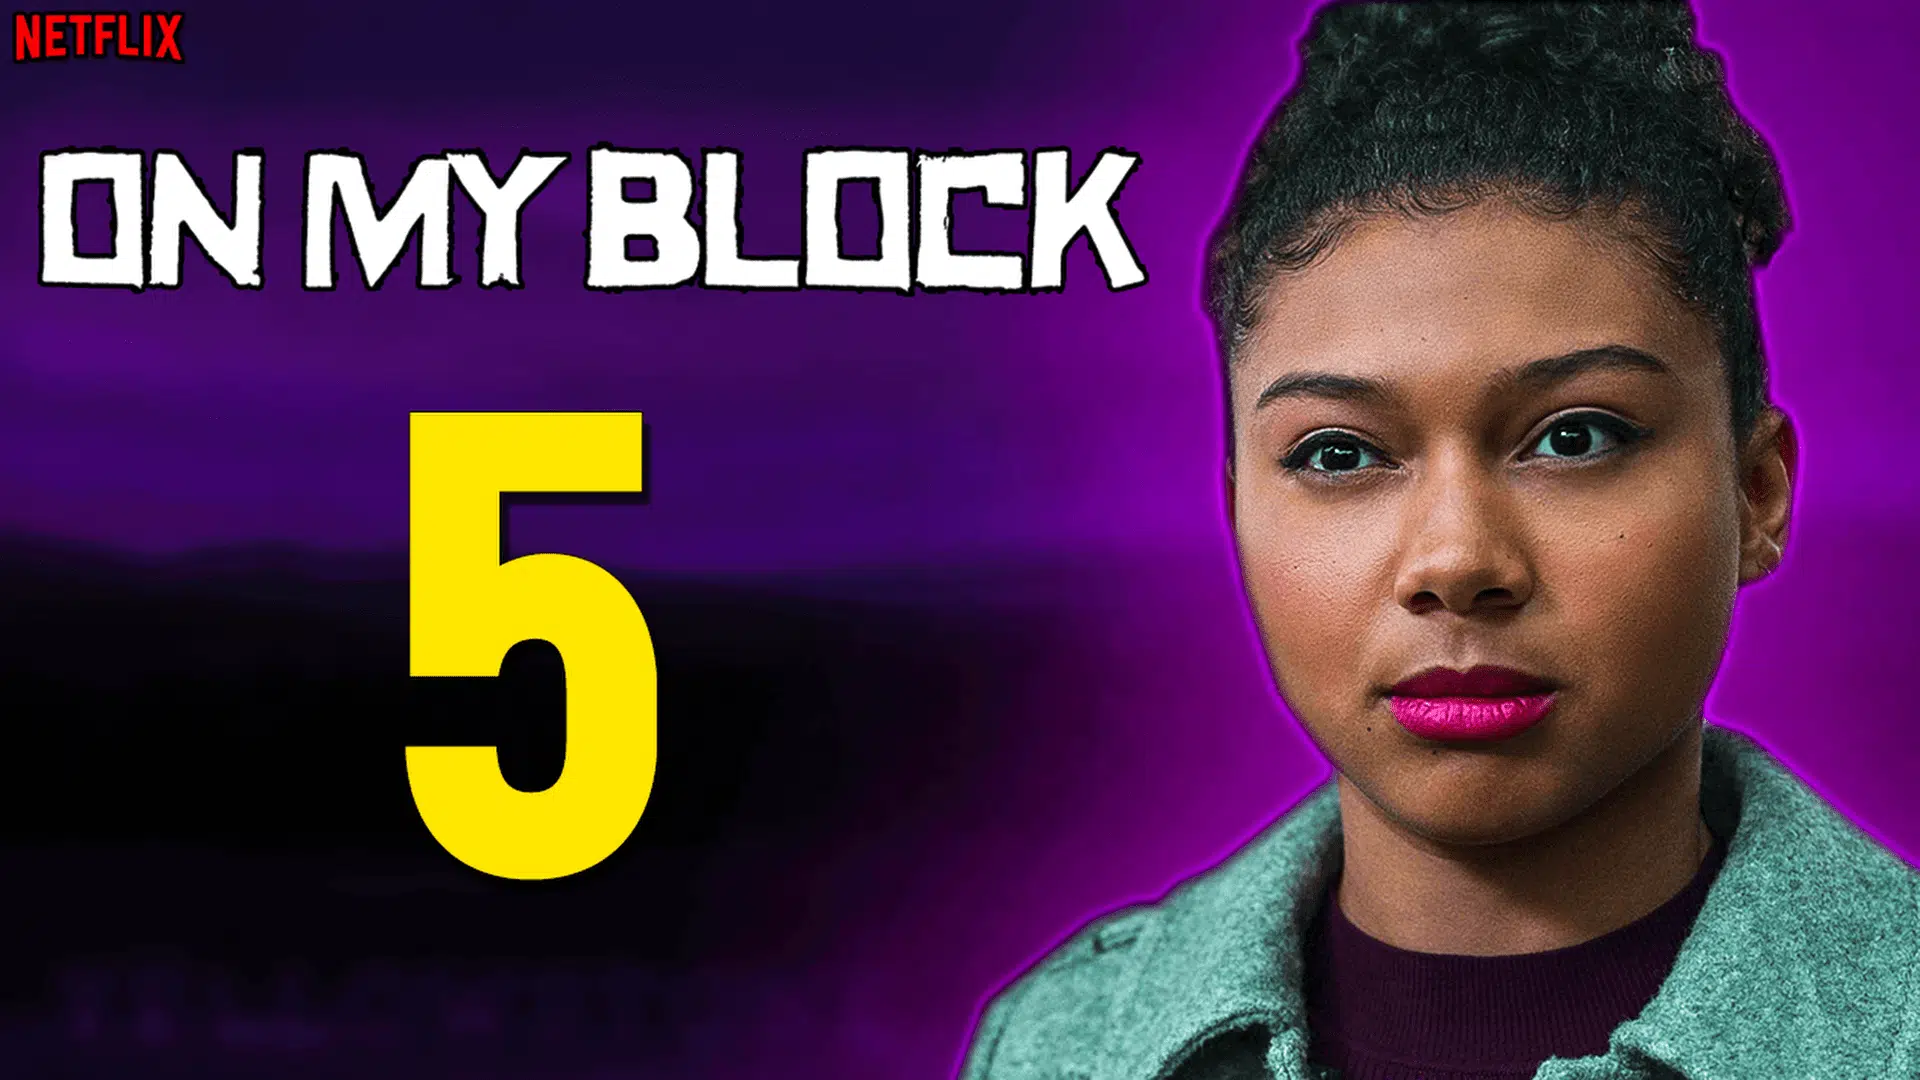 On My Block Season 5 Release Date, Trailer - What's Next?